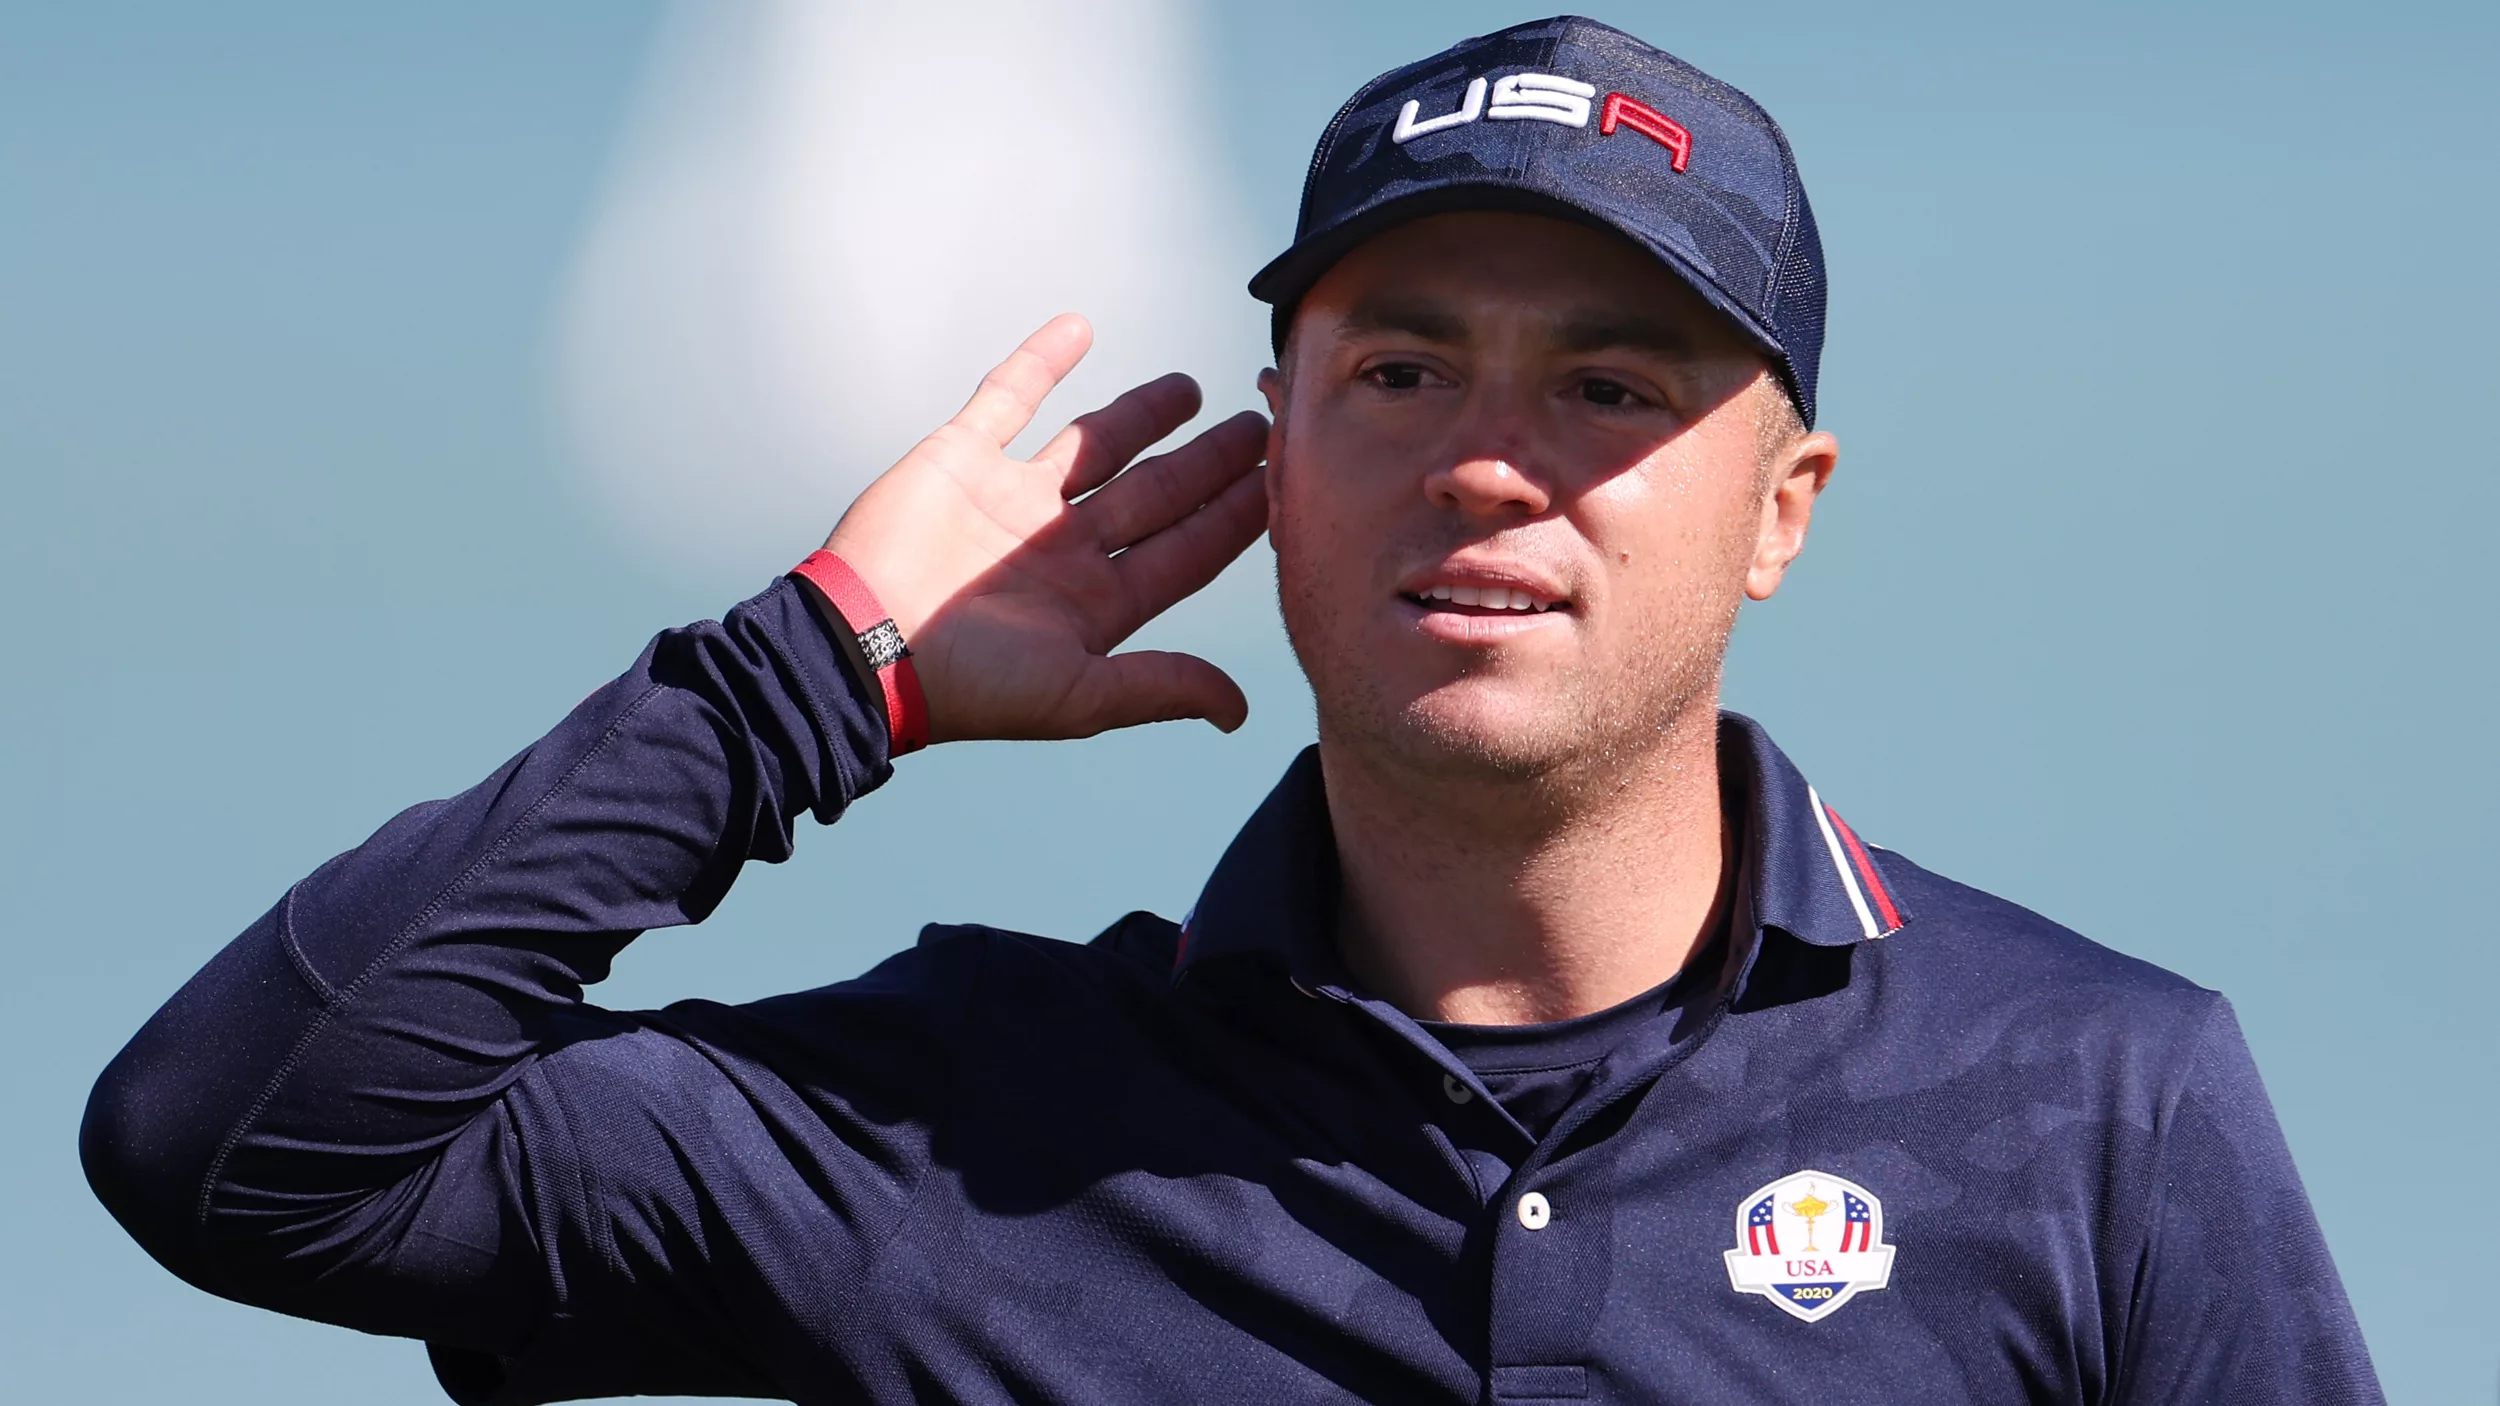 The Mysterious Disappearance of JT from the Ryder Cup